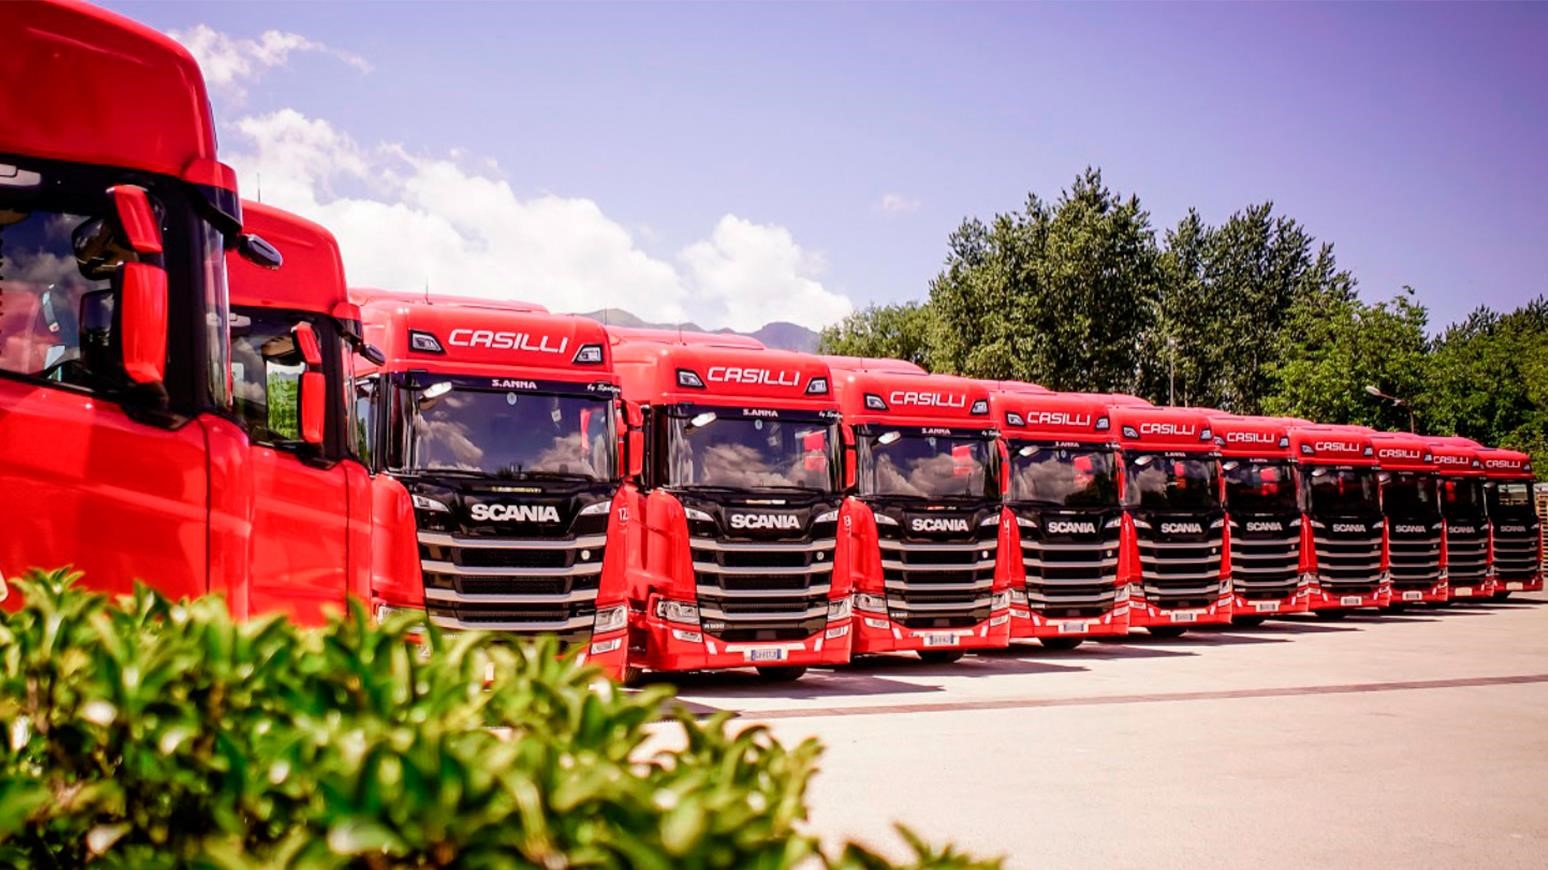 Italian Transporter Casilli Enterprise Invests In Its Future With Purchase Of Scania R 500 & Gas-Powered R 410 Trucks